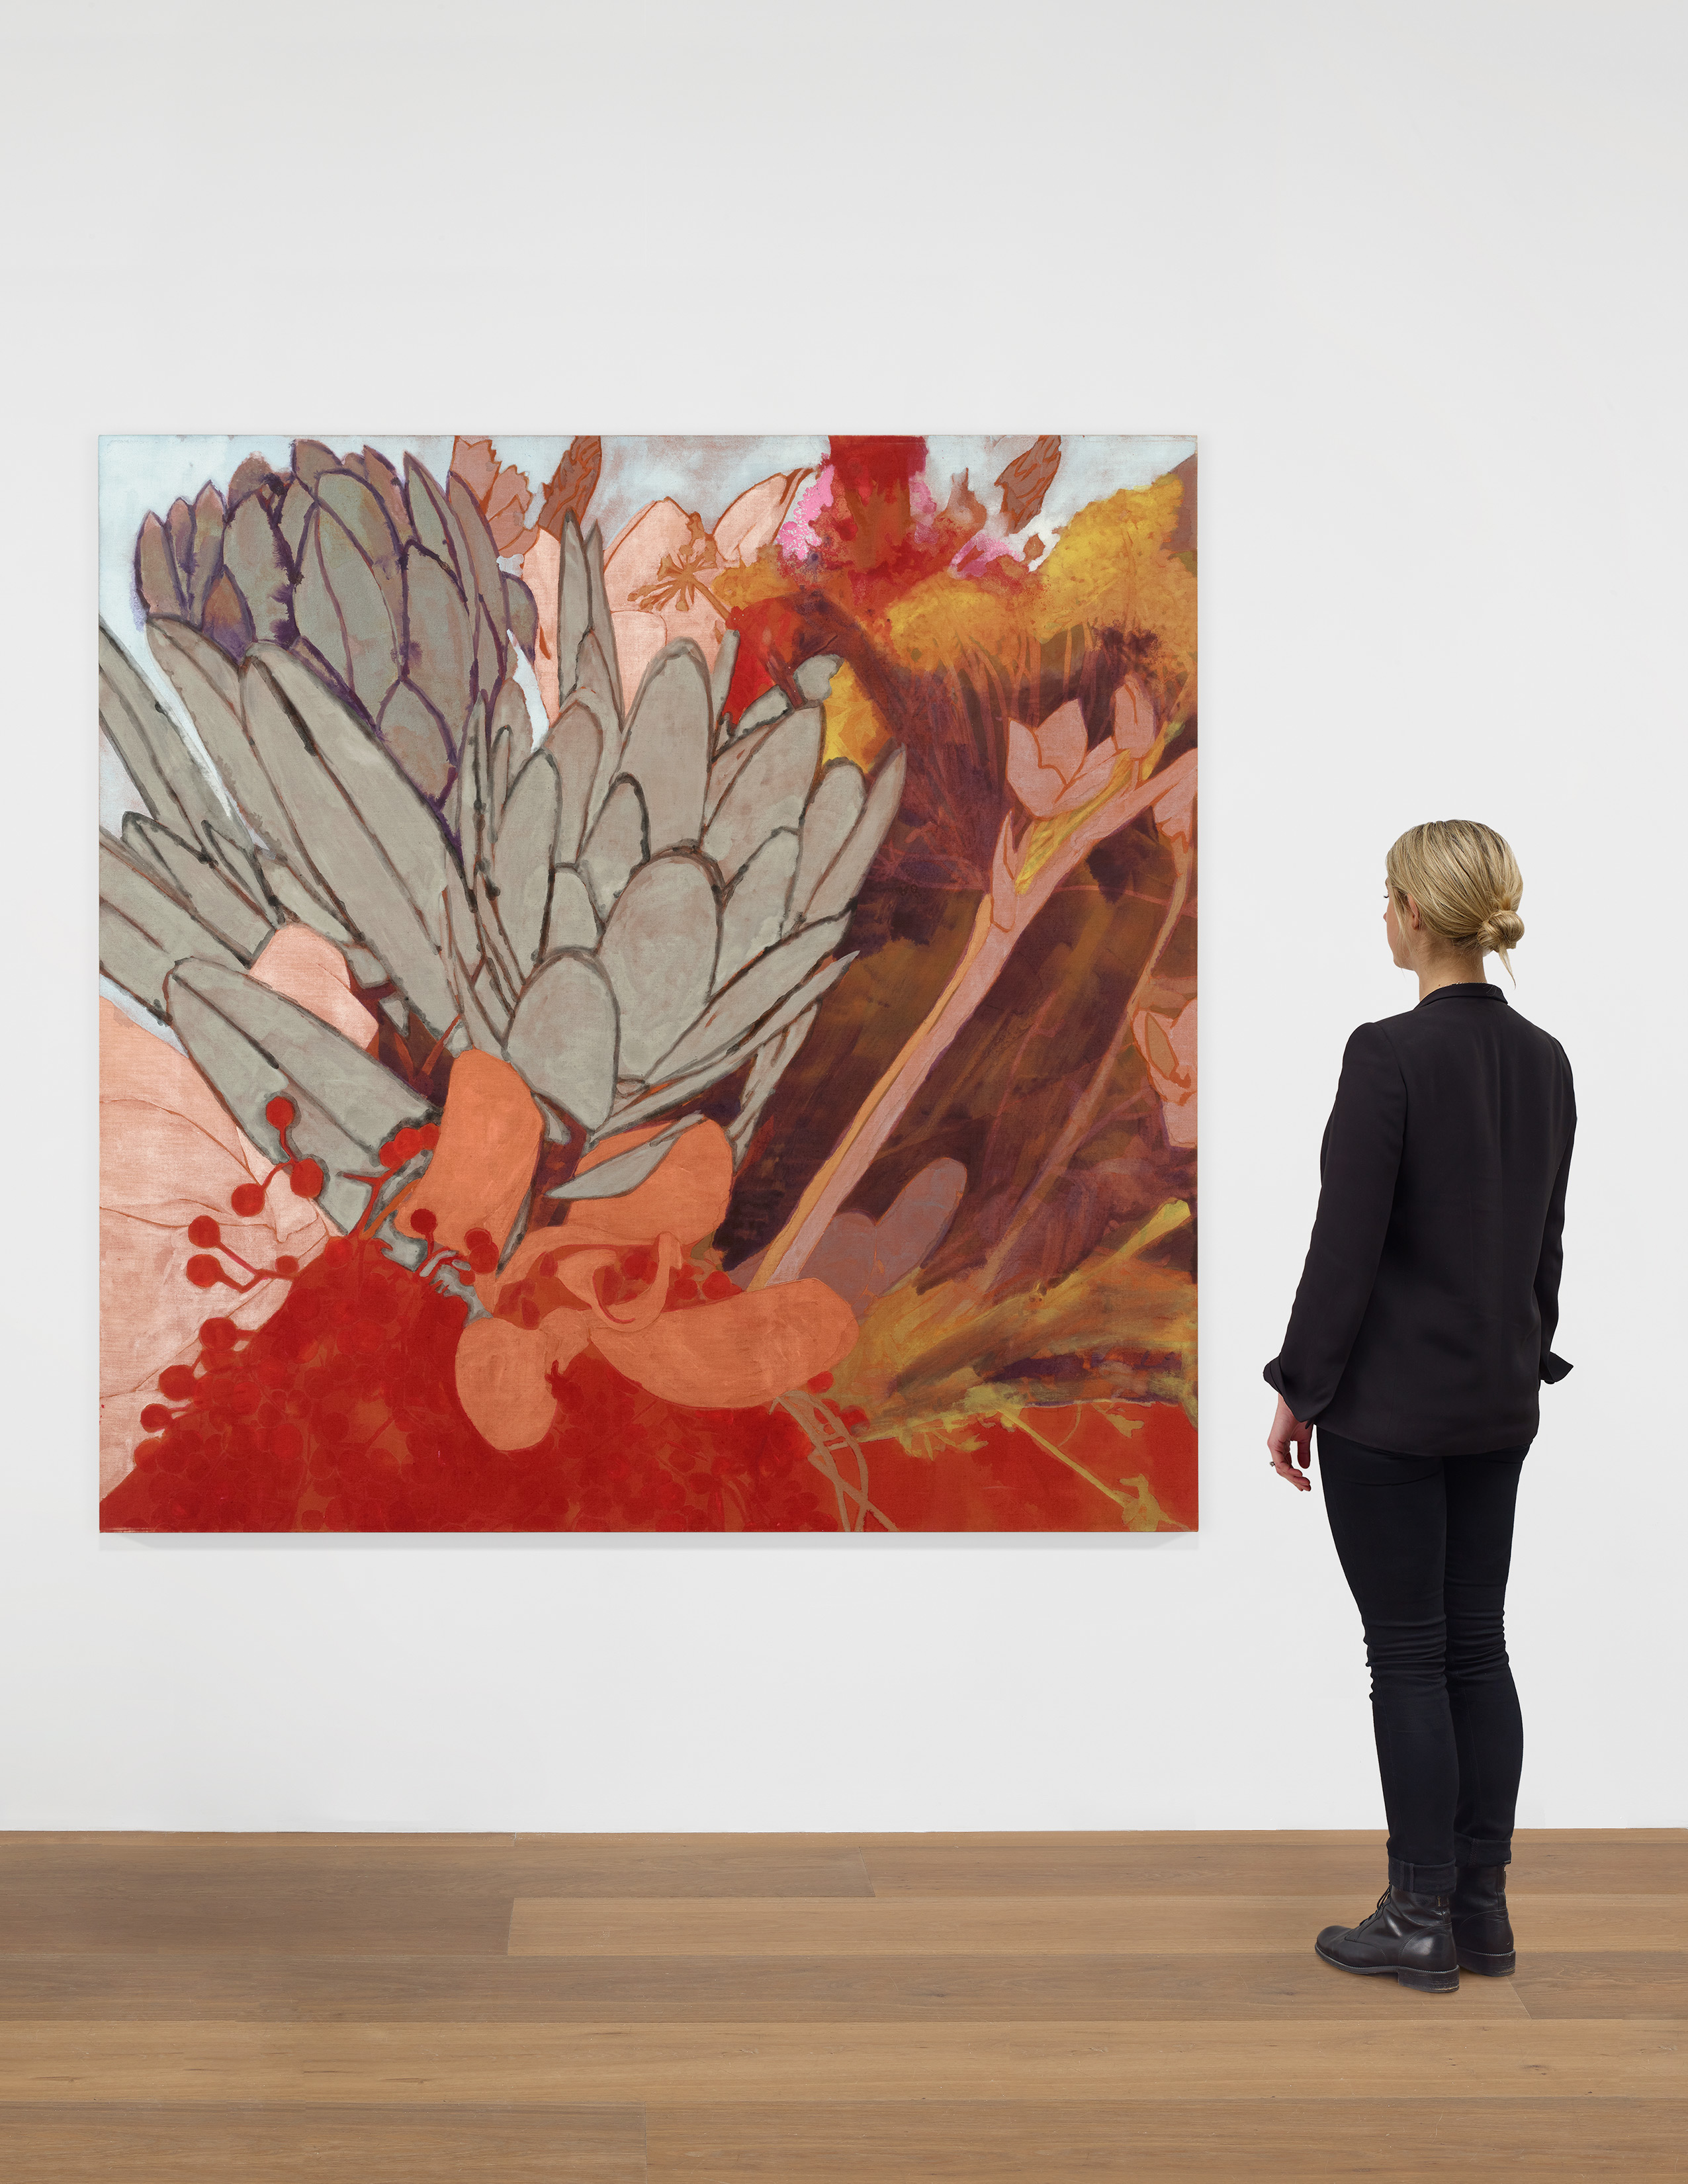 Installation view of Francesco Clemente's painting Winter Flowers IV